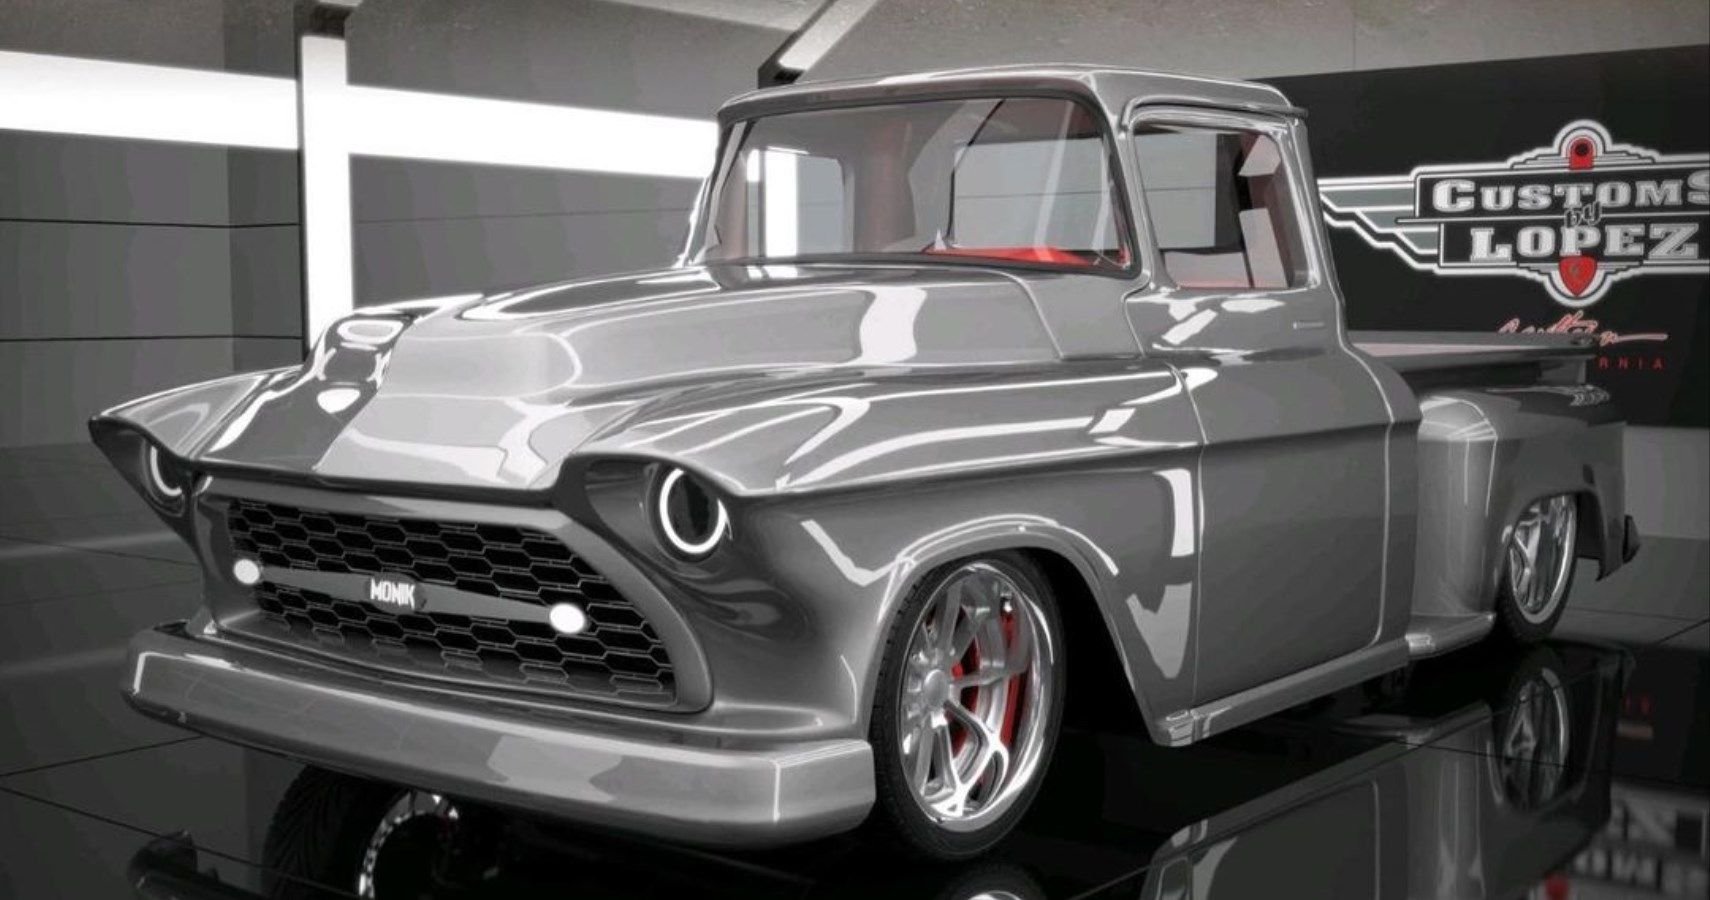 This 1956 Chevy Pickup Is Turning Into A Slick Hot Rod